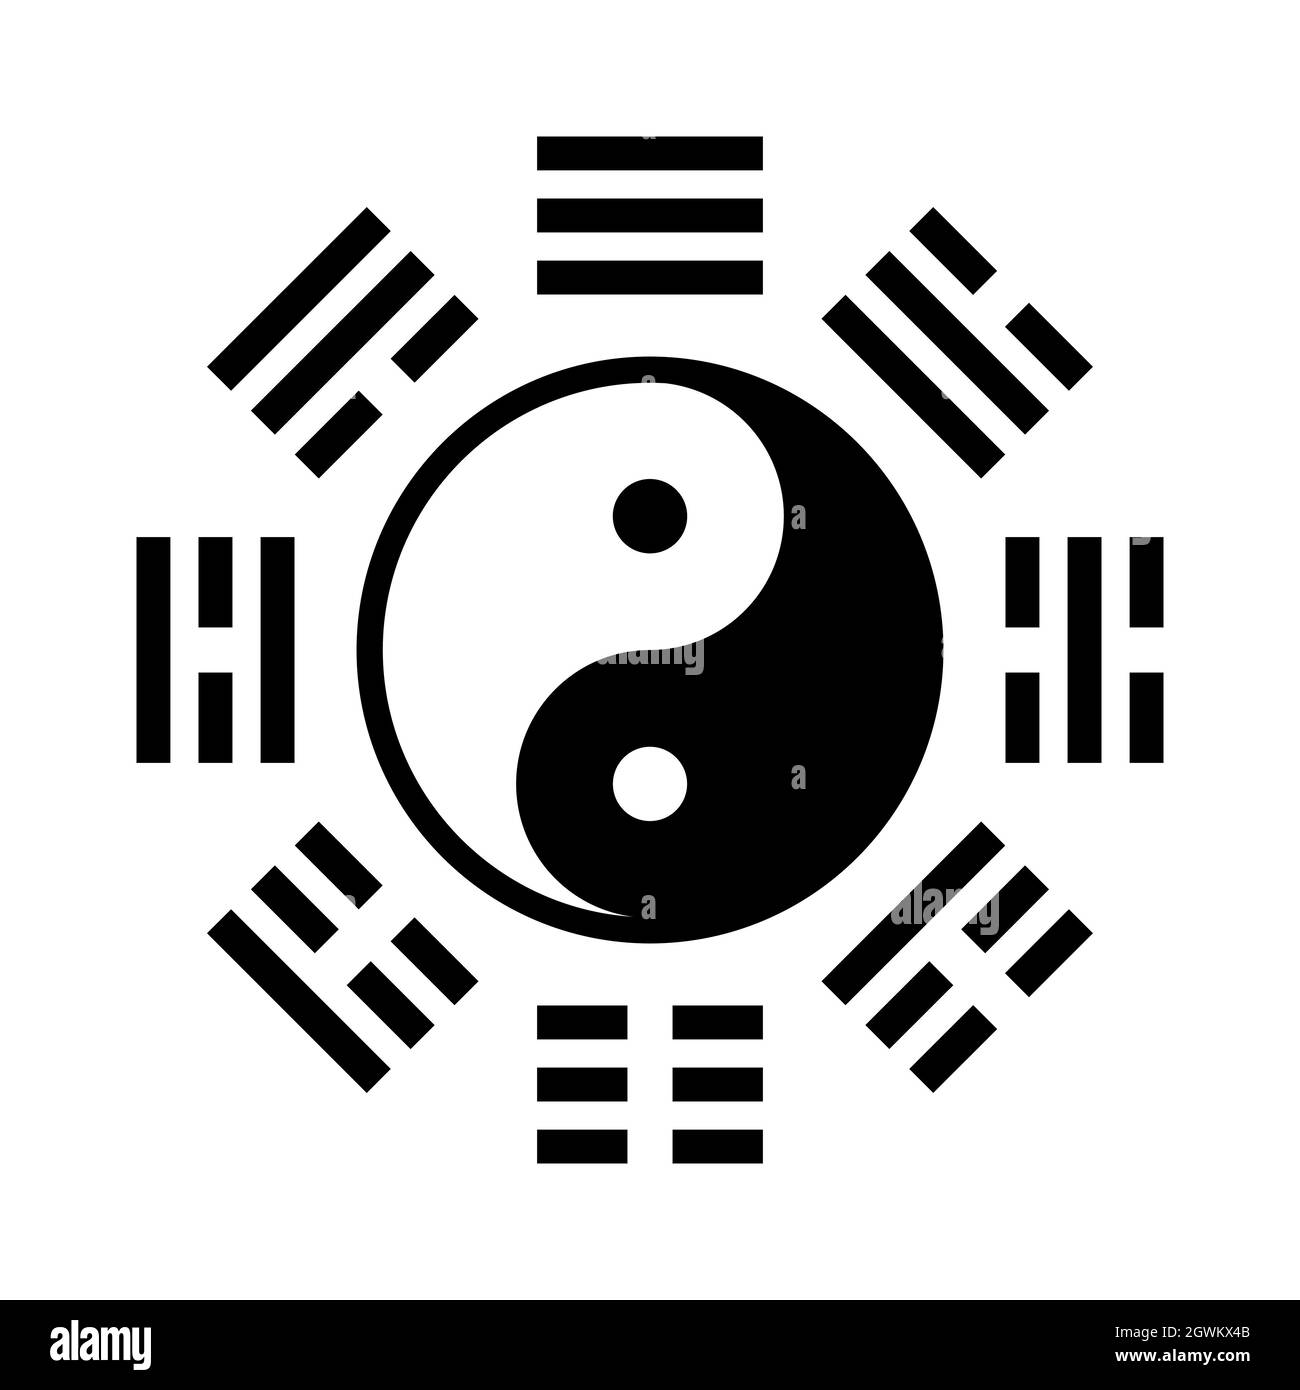 Pattern of bagua Black and White Stock Photos & Images - Alamy